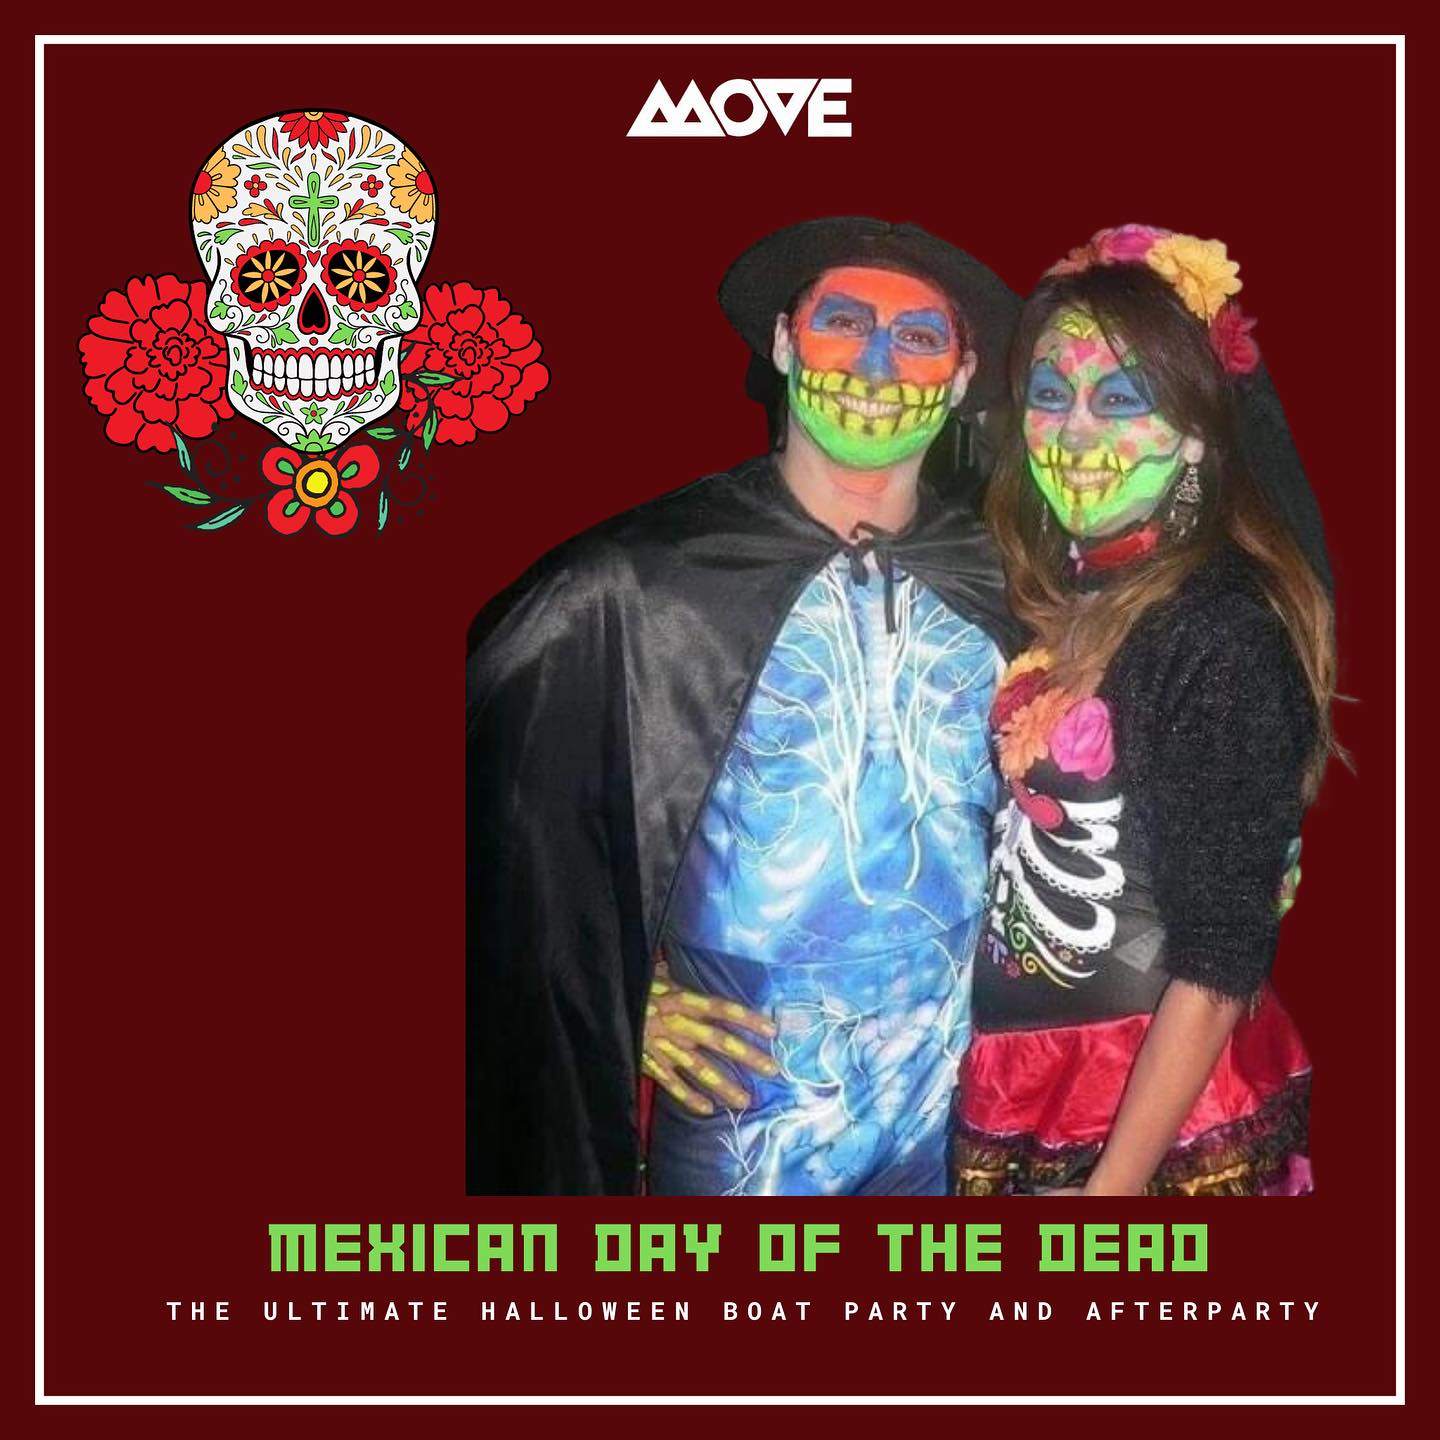 Mexican Day of the Dead Boat party and after-party - Página trasera